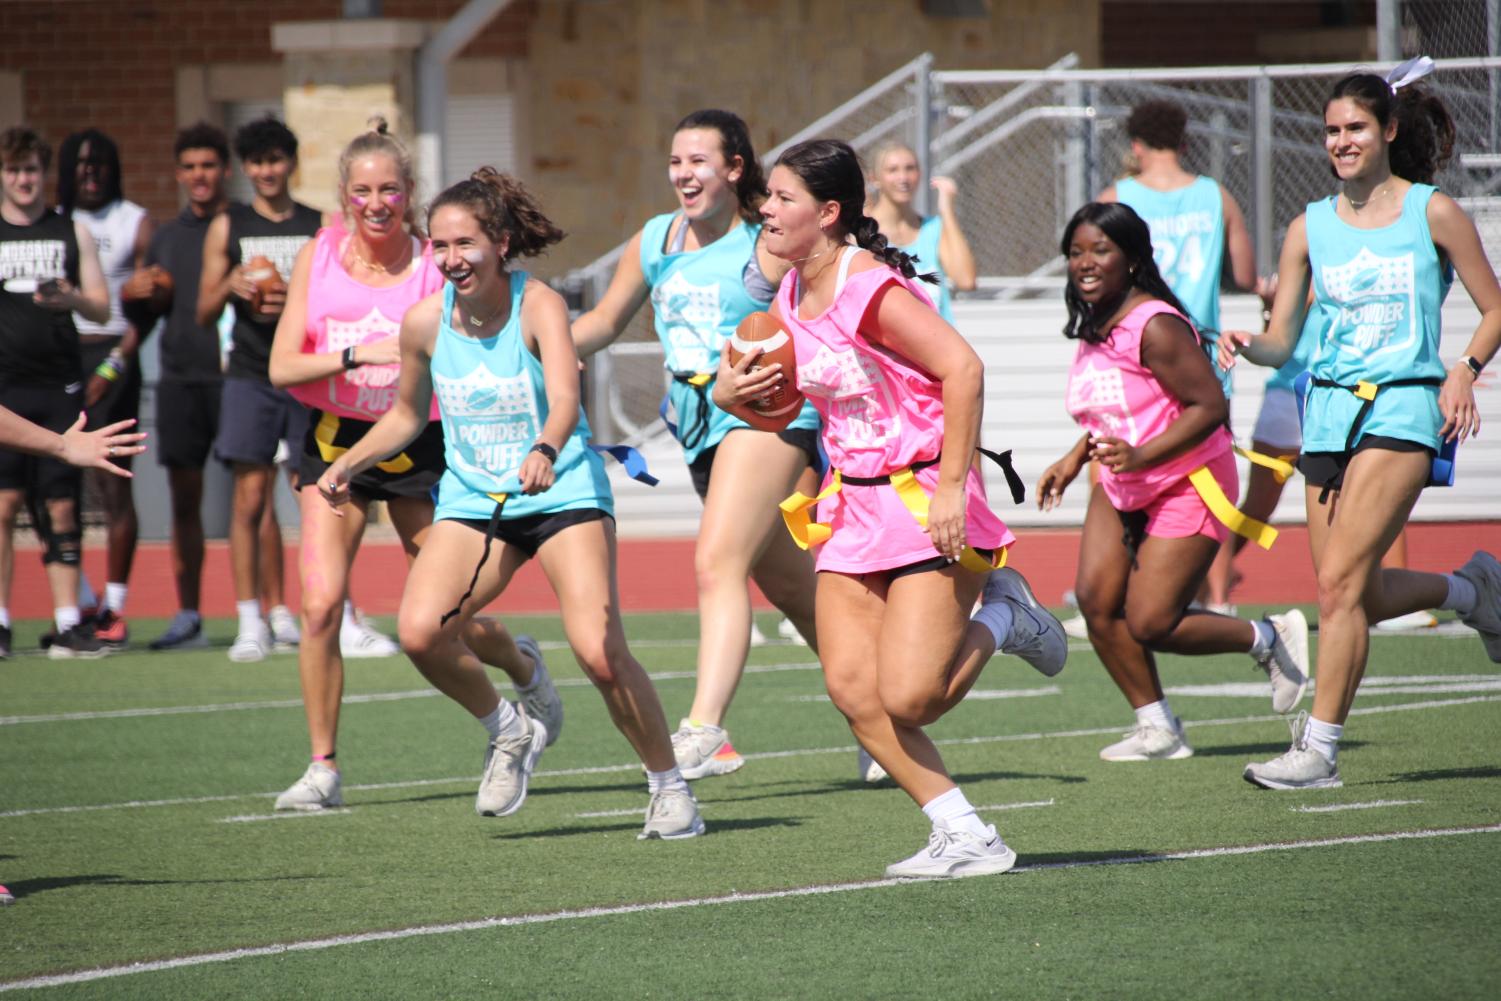 Players run for the ball. Powder Puff is played at schools across North America. 